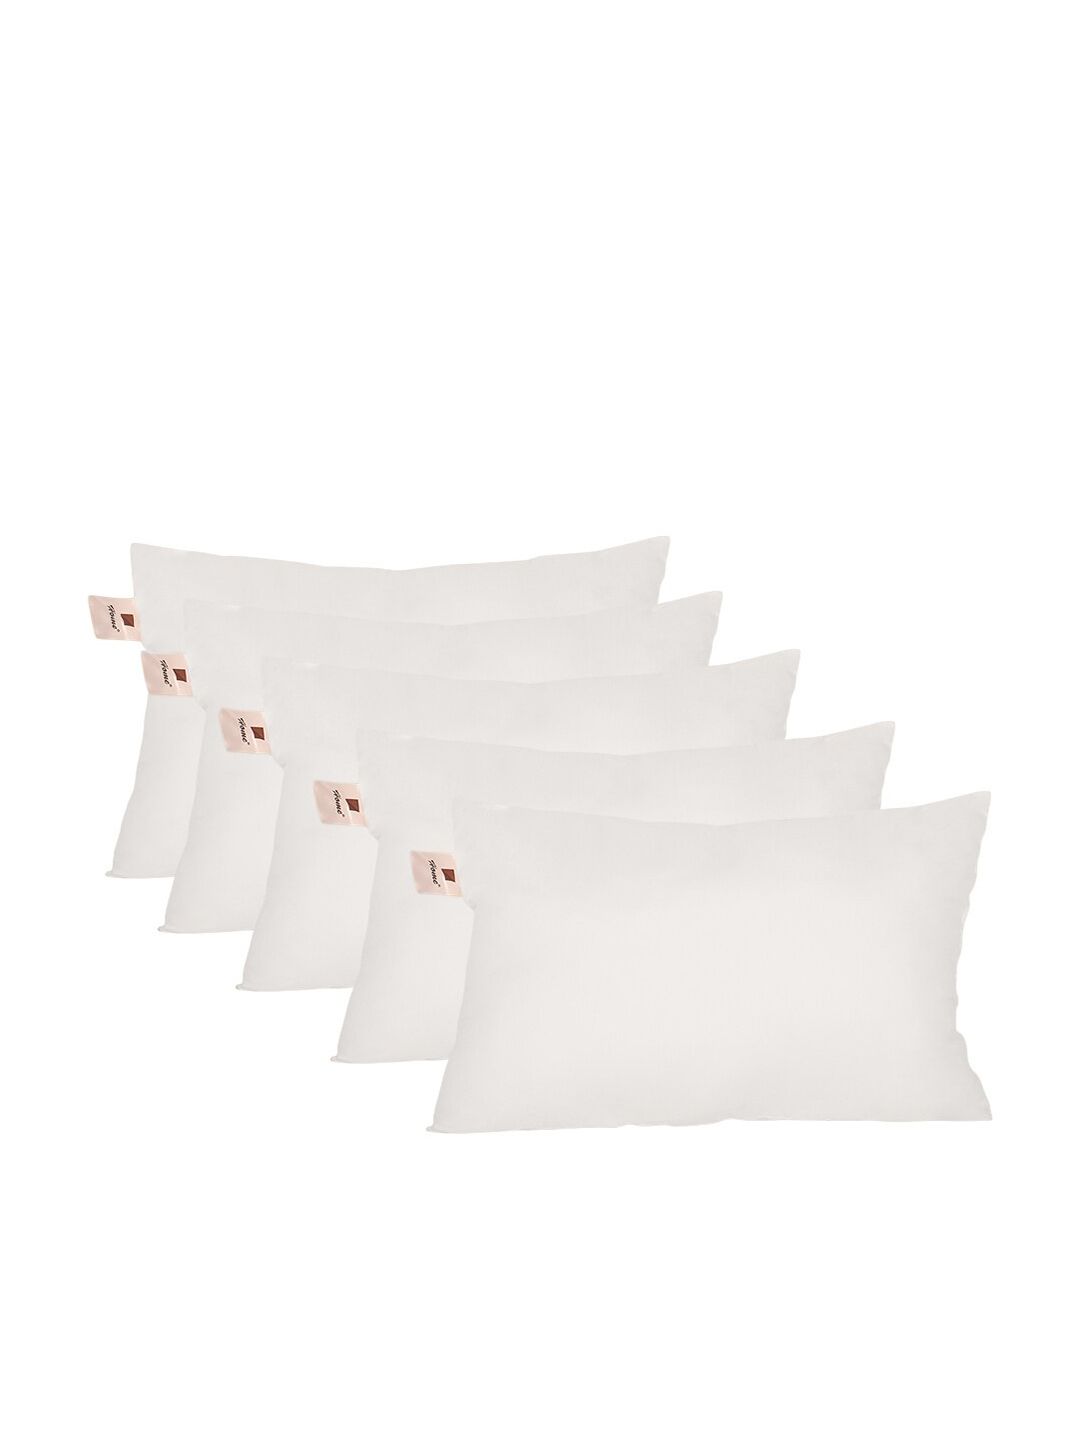 Home Pack of 5 White Solid Micro Cushion Pillows Price in India